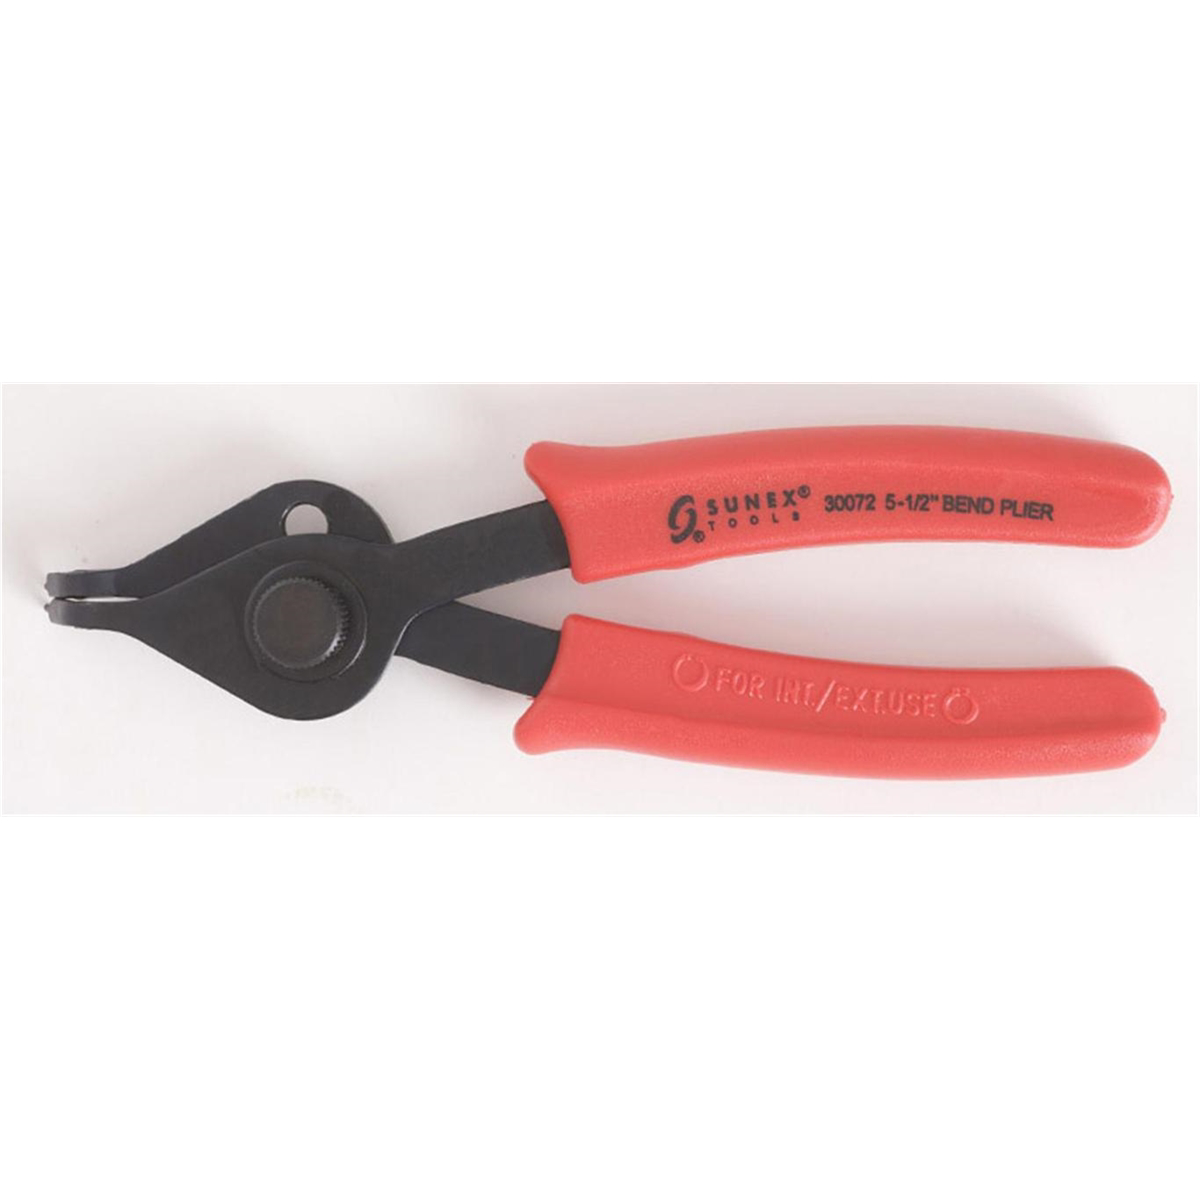 5-1/2" Bend Pliers with .047" Tip